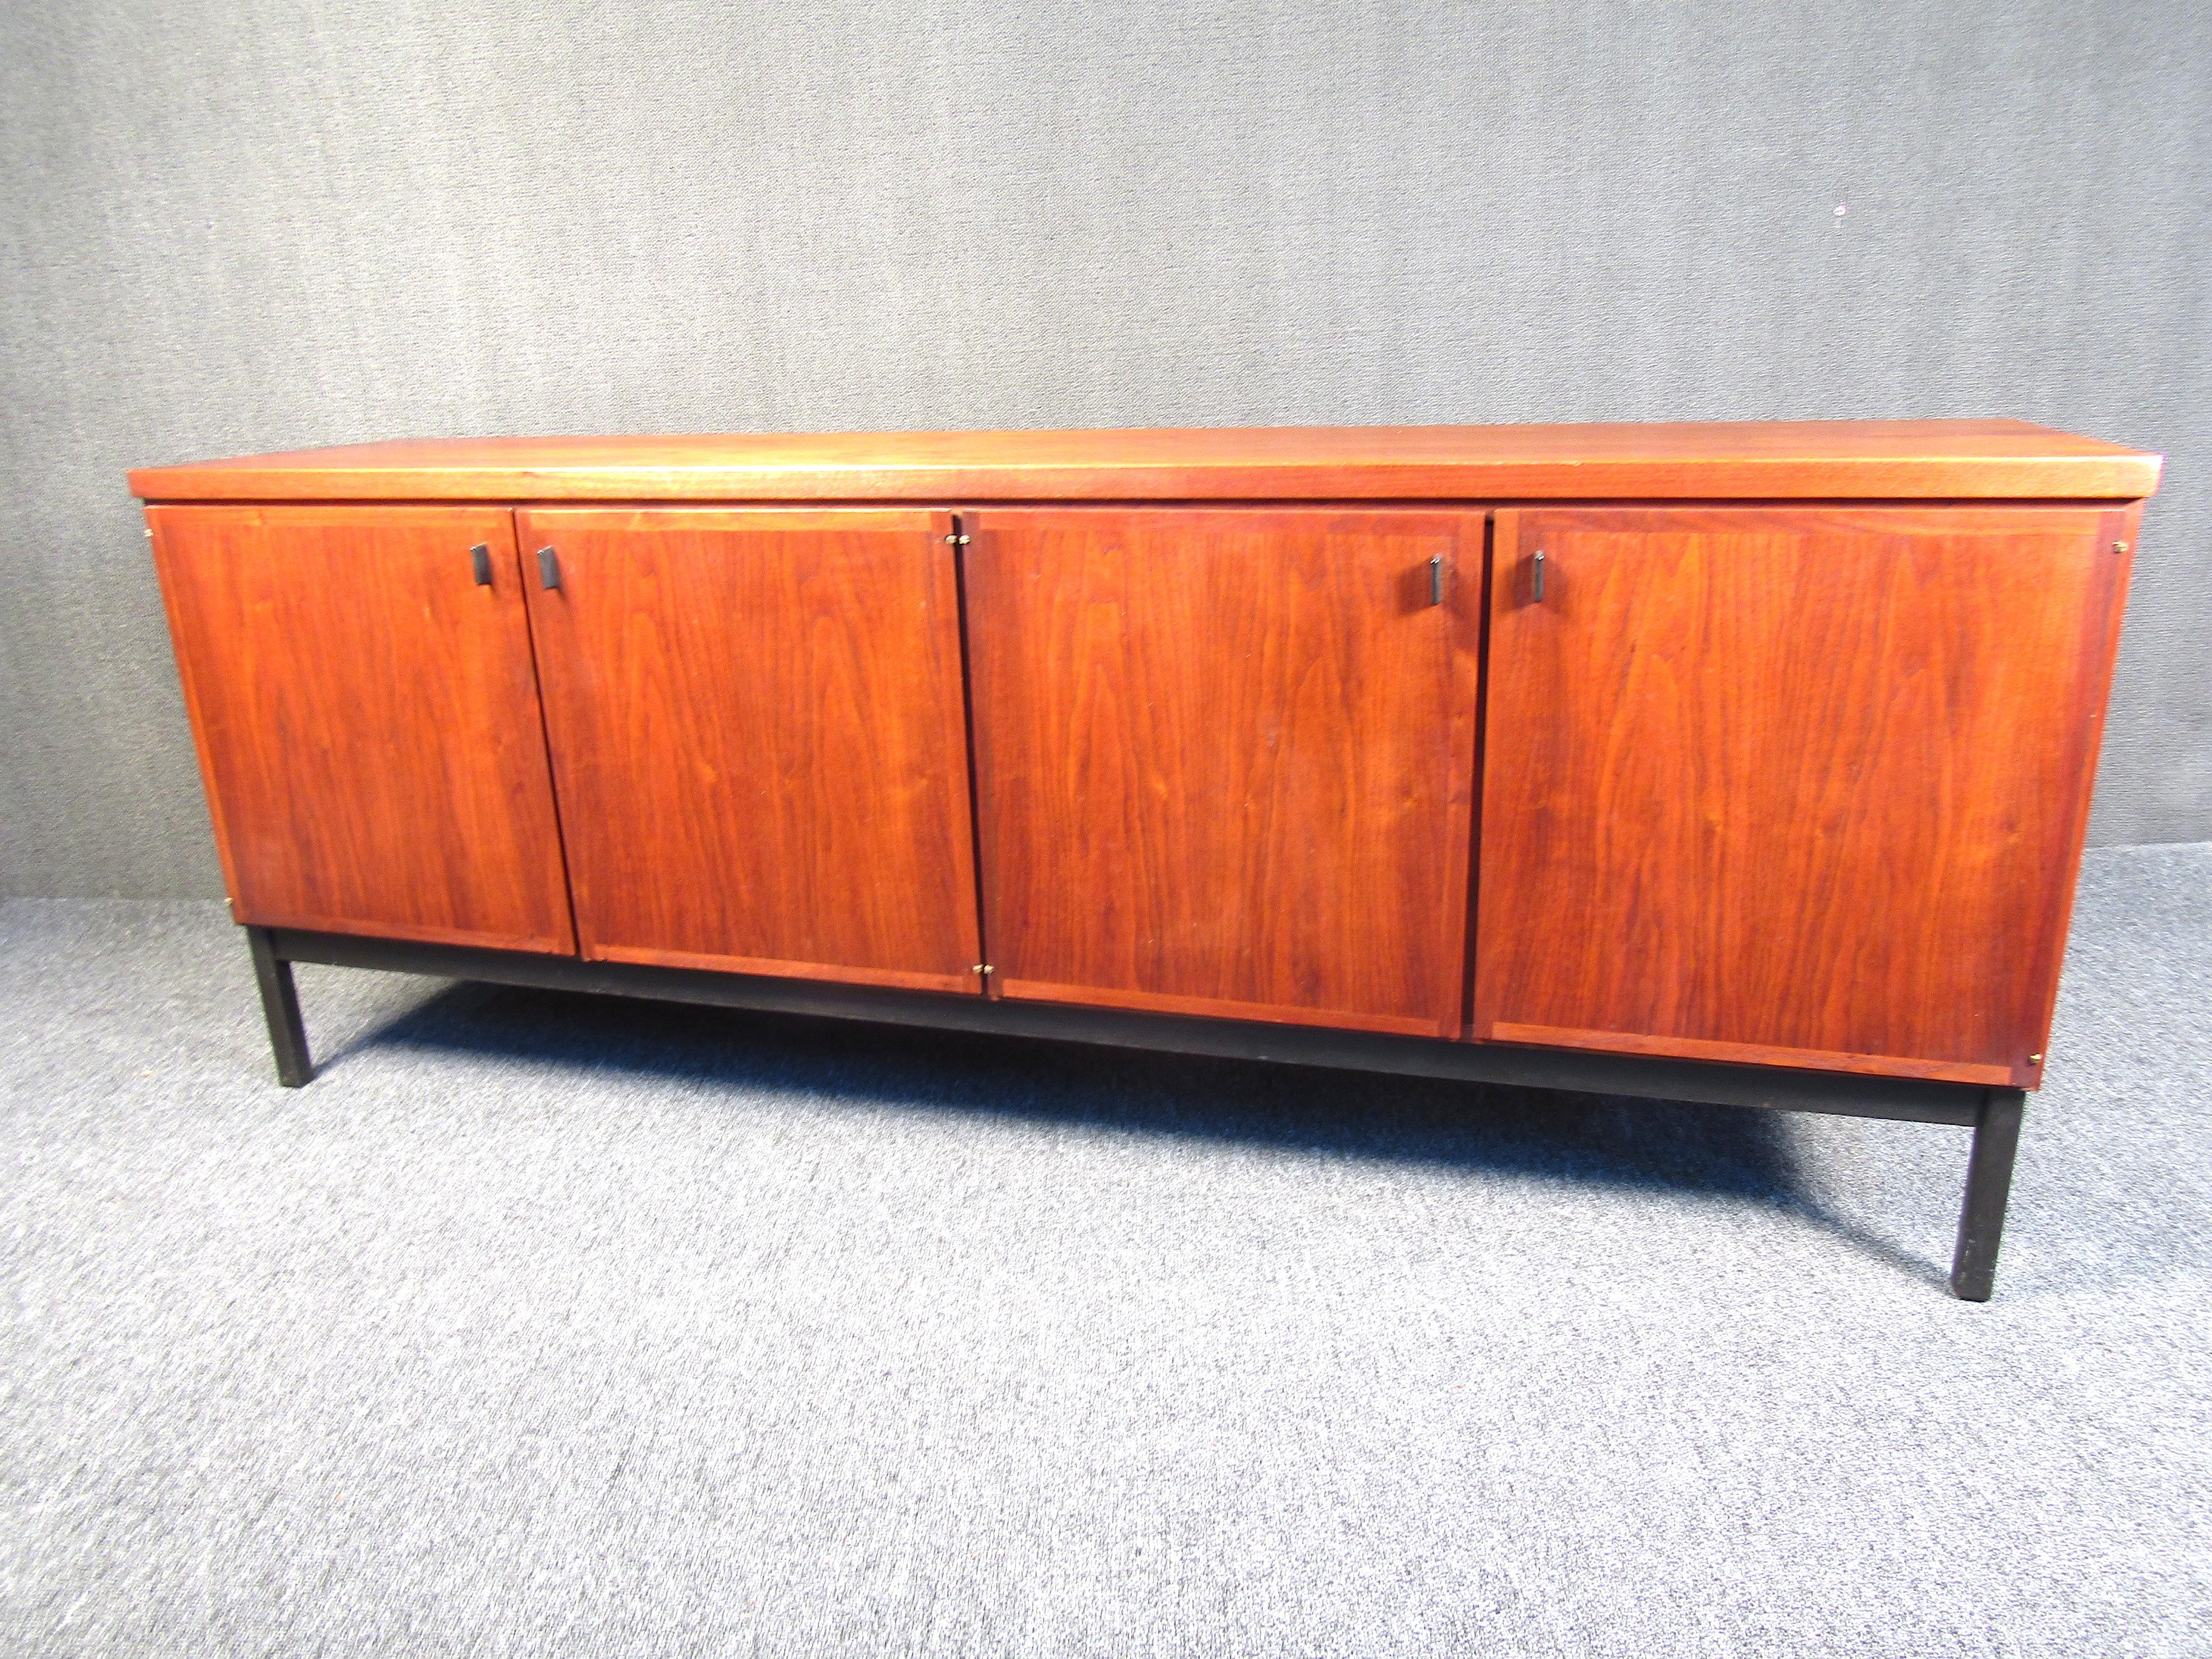 This beautiful walnut credenza features plenty of storage underneath as well as a beautiful dark grain pattern as well. Perfect for any dining room or side accent room. With sturdy construction, this piece will be a valued possession for years to